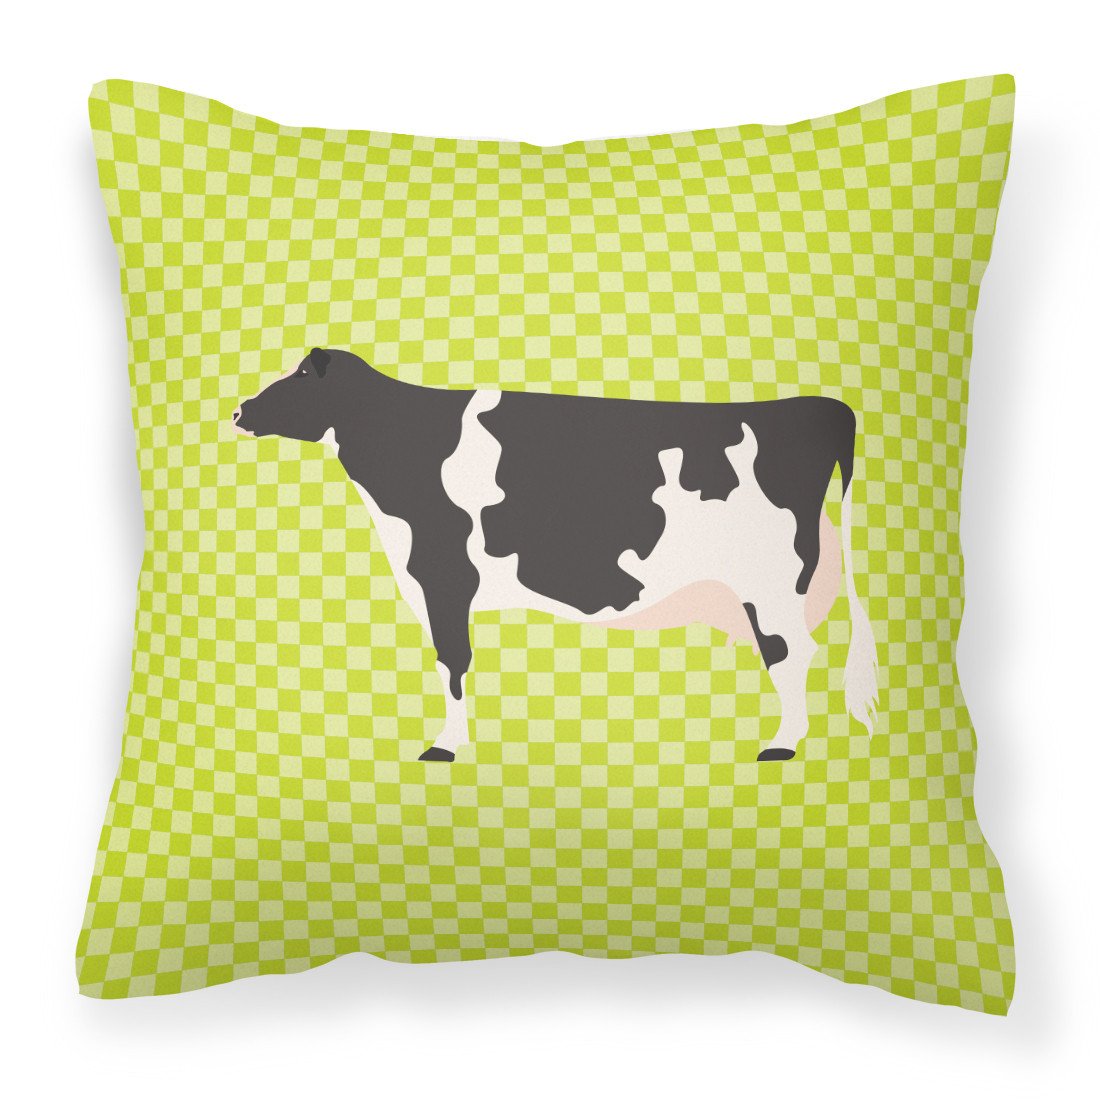 Holstein Cow Green Fabric Decorative Pillow BB7648PW1818 by Caroline's Treasures